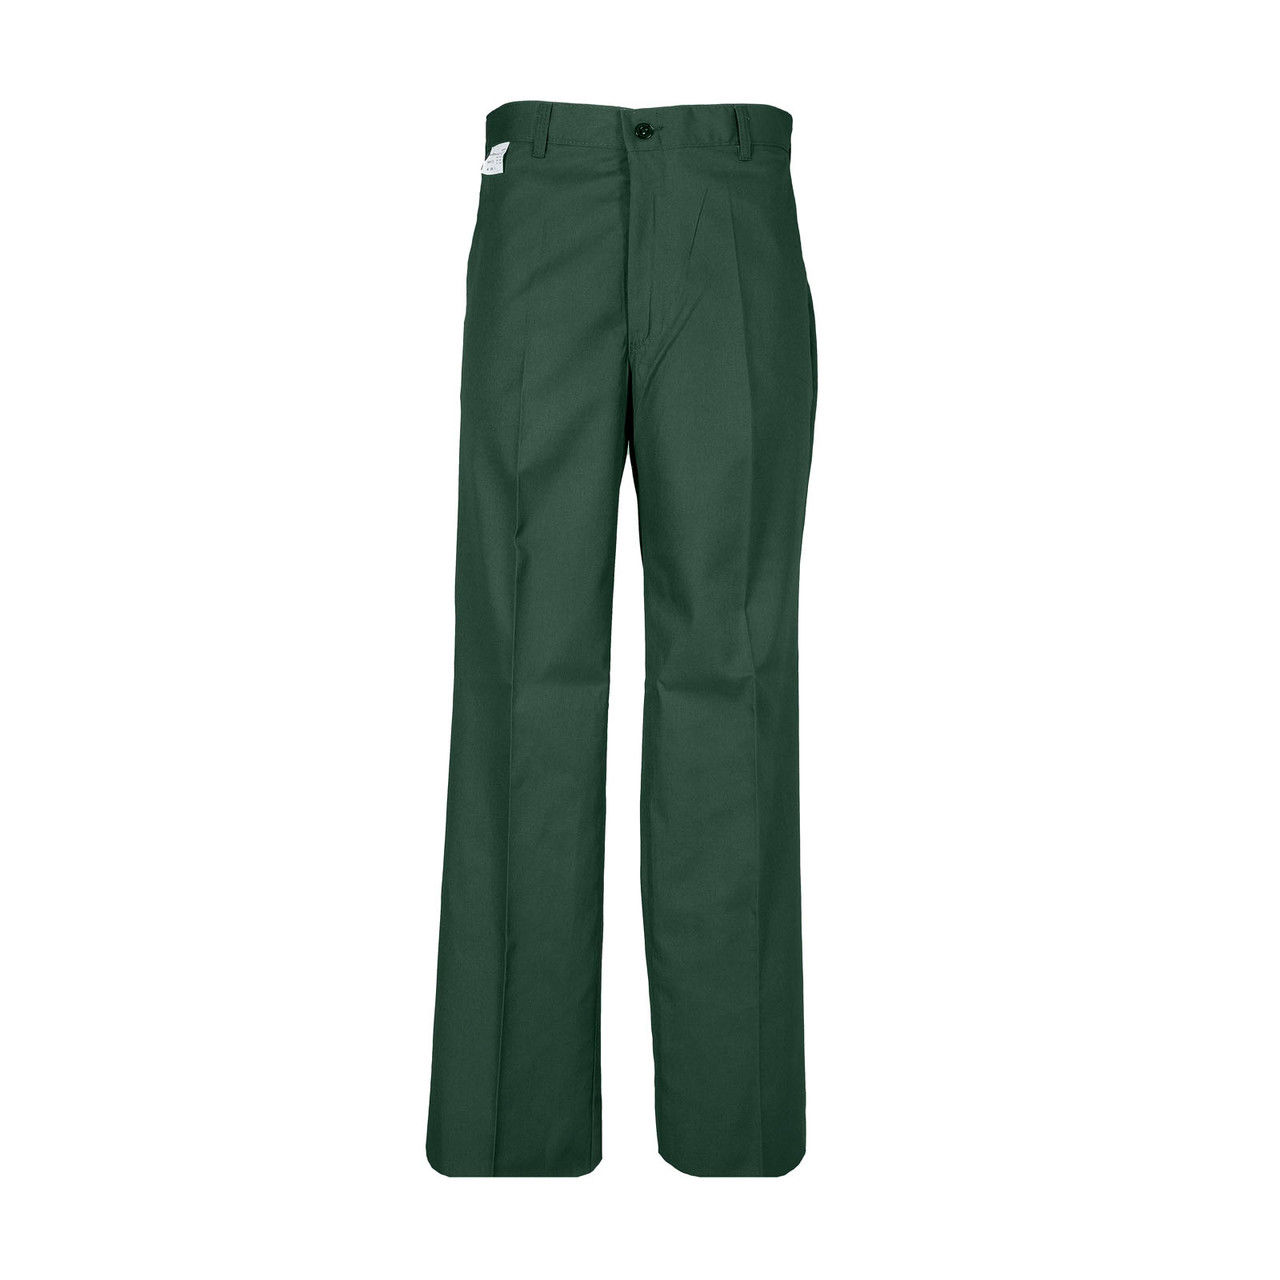 From where are these green work pants shipped?